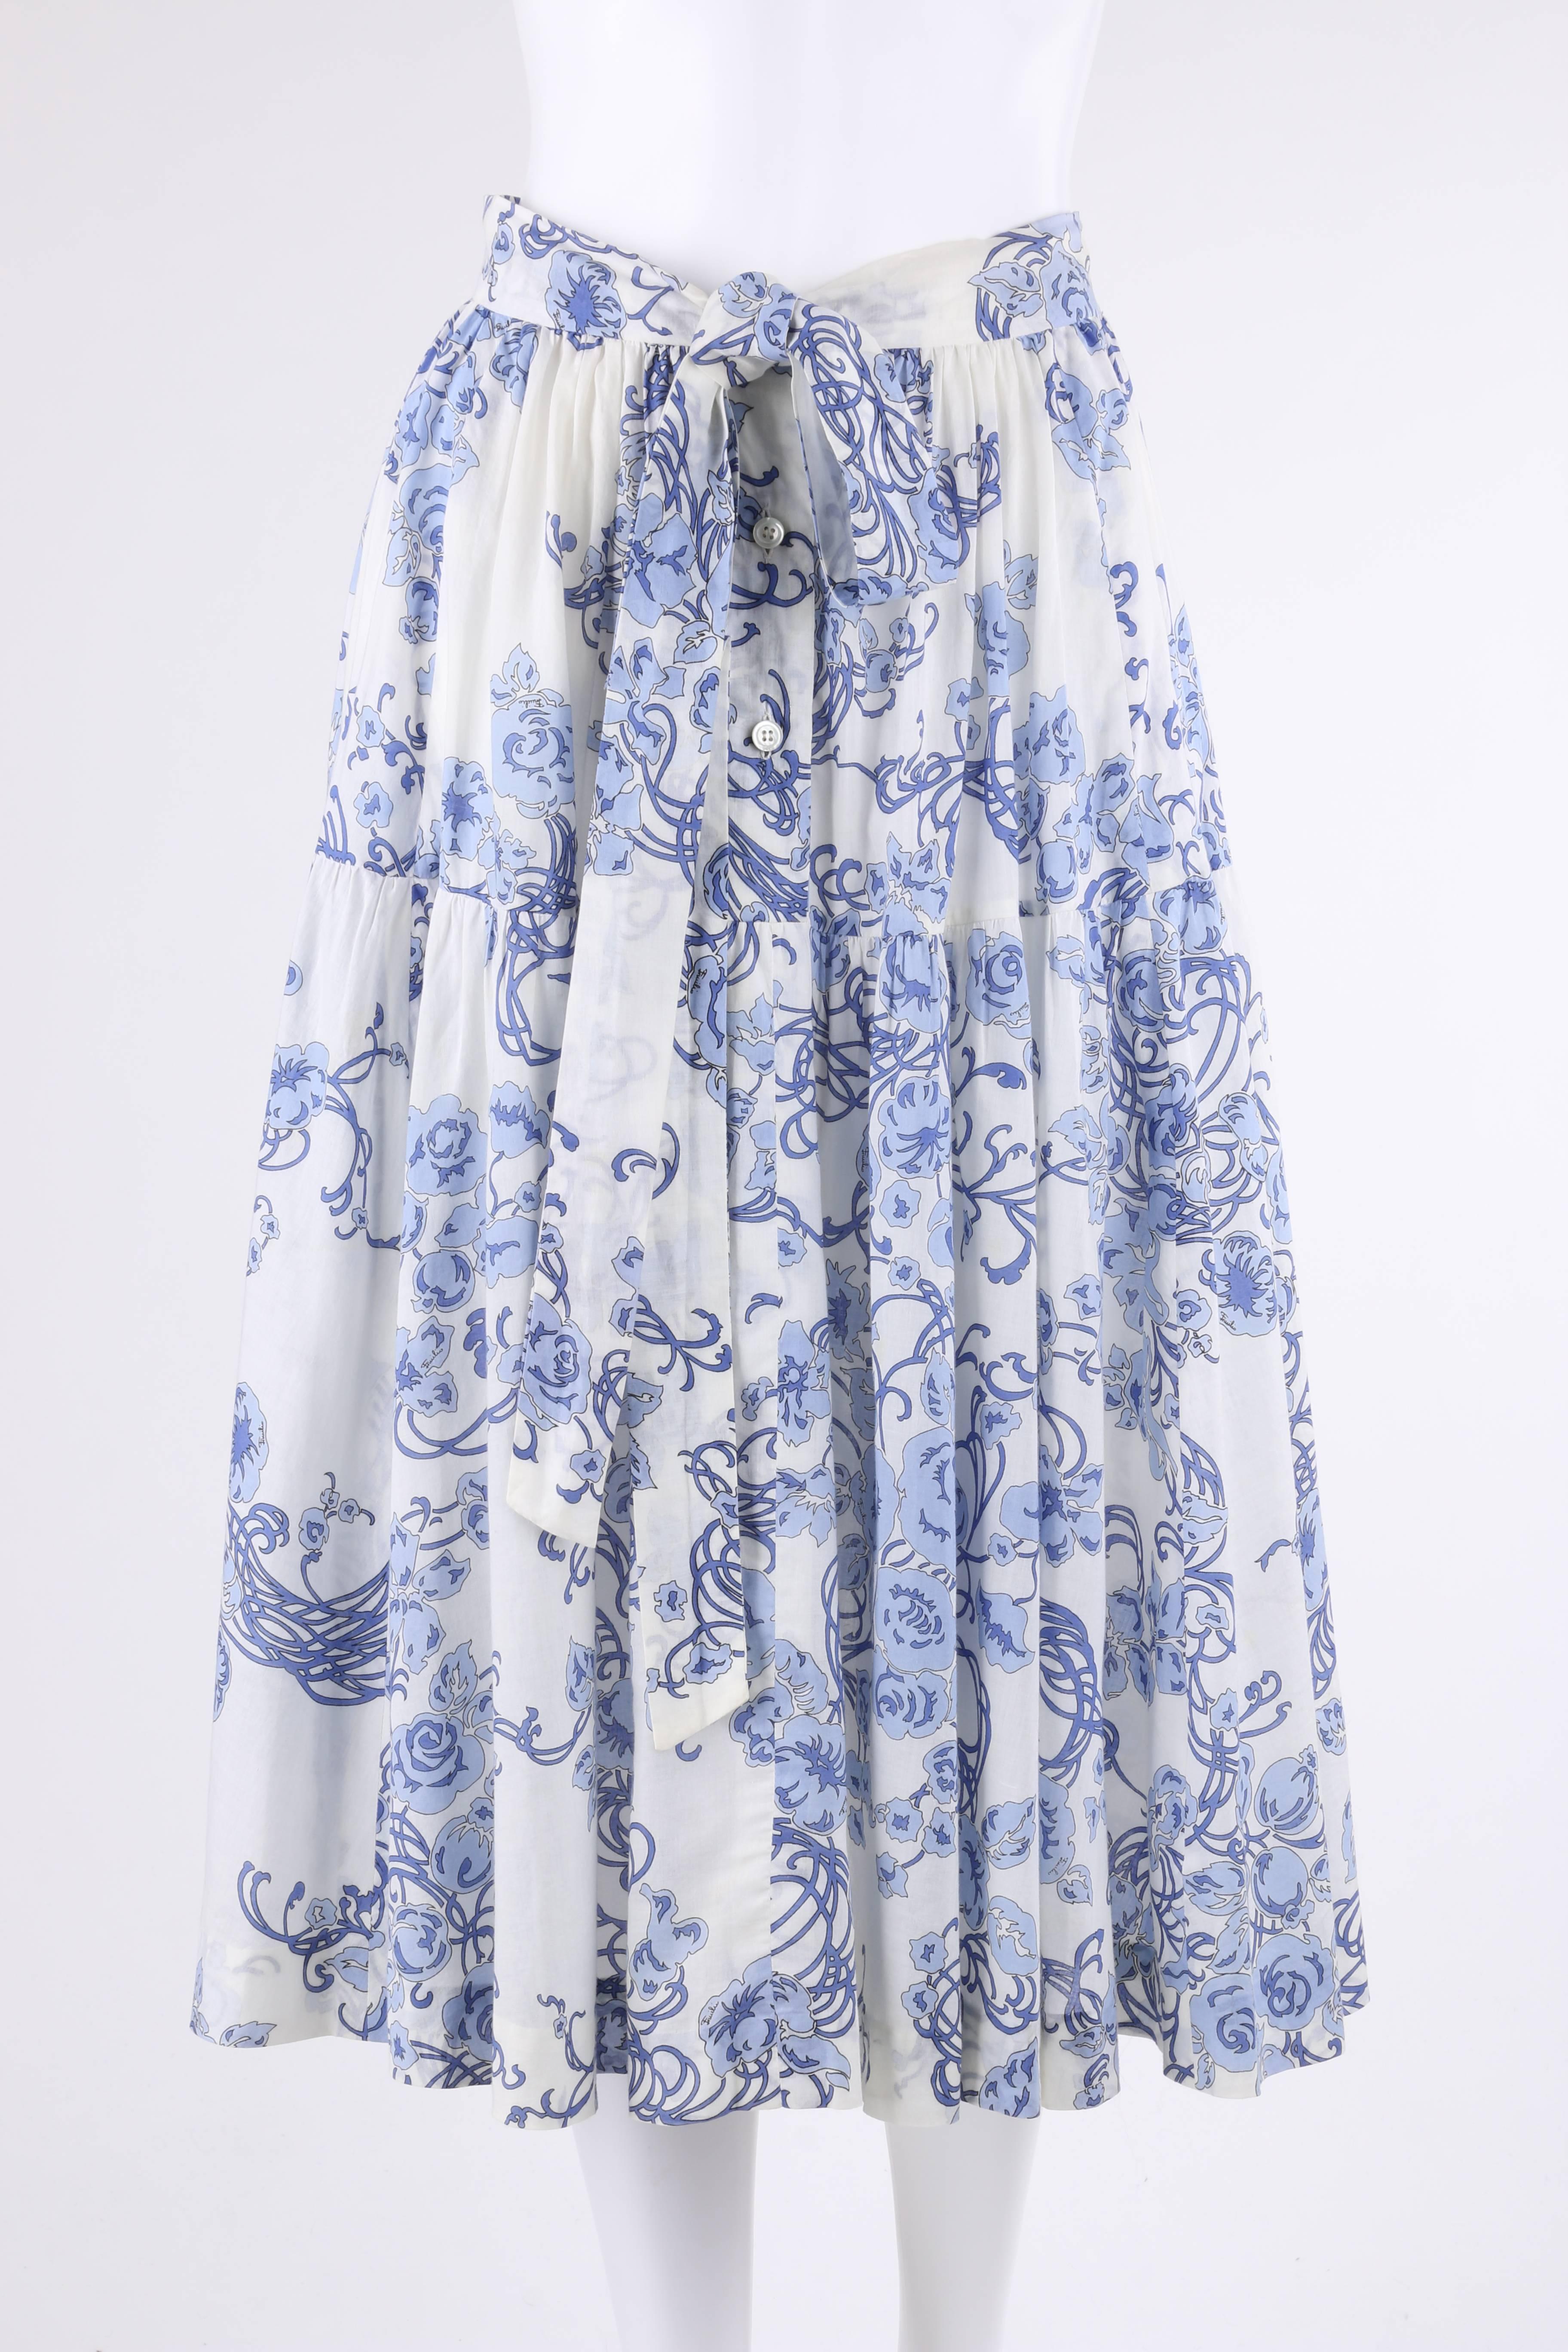 white and blue floral blouse